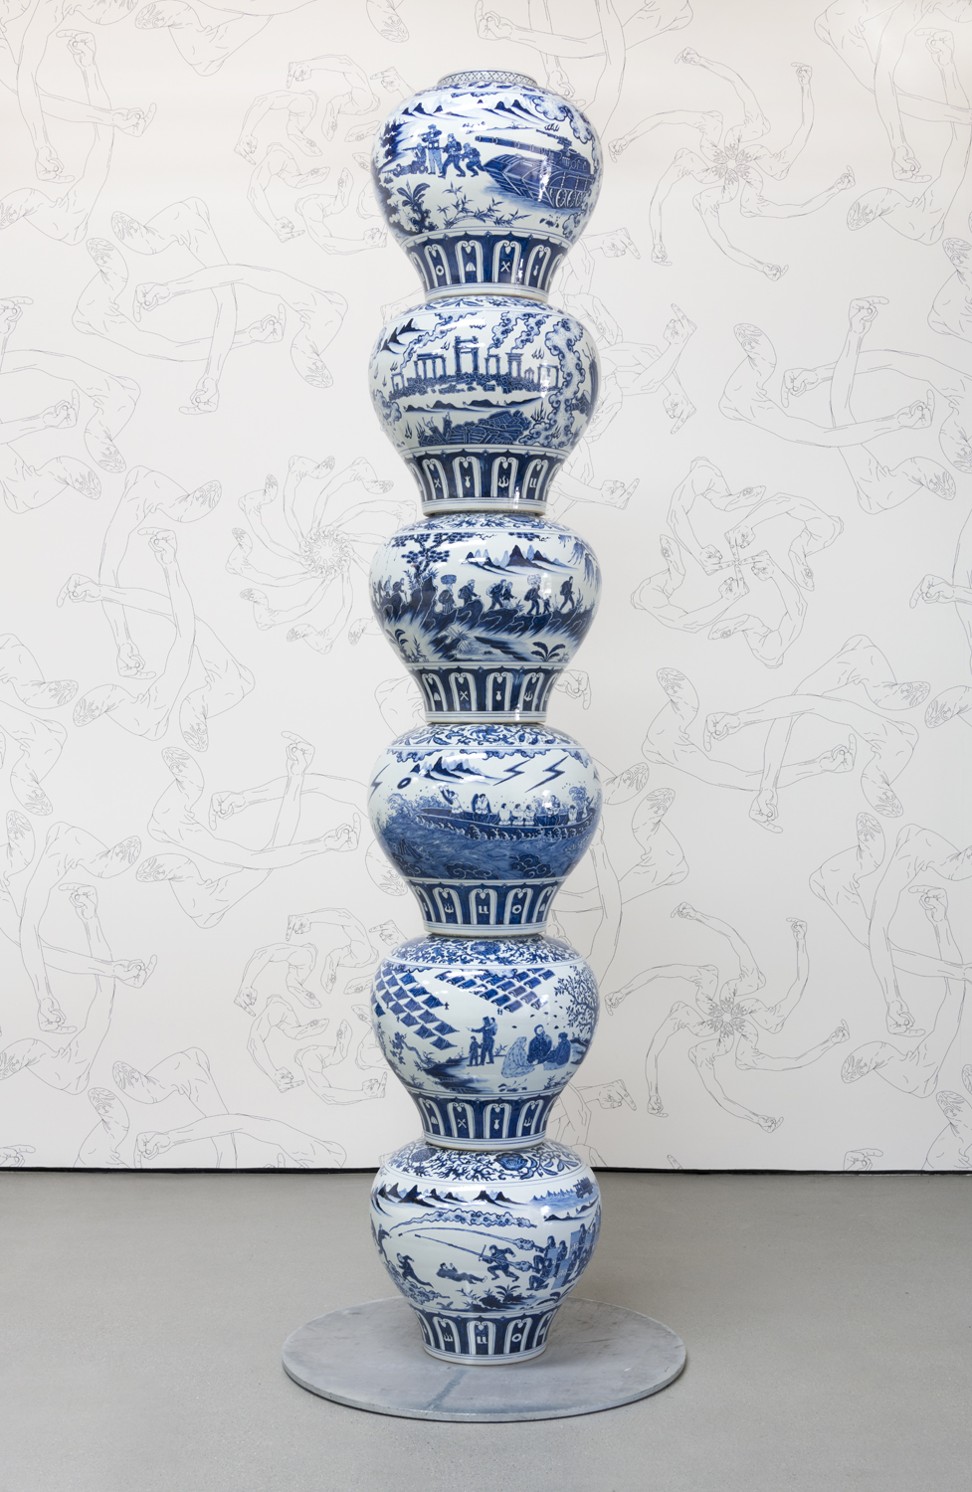 Vases with Refugee Motif as a Pillar (2017) part of Ai’s Weiwei Cao/Humanity exhibition at UTA Artist Space. Photo: Courtesy UTA Artist Space